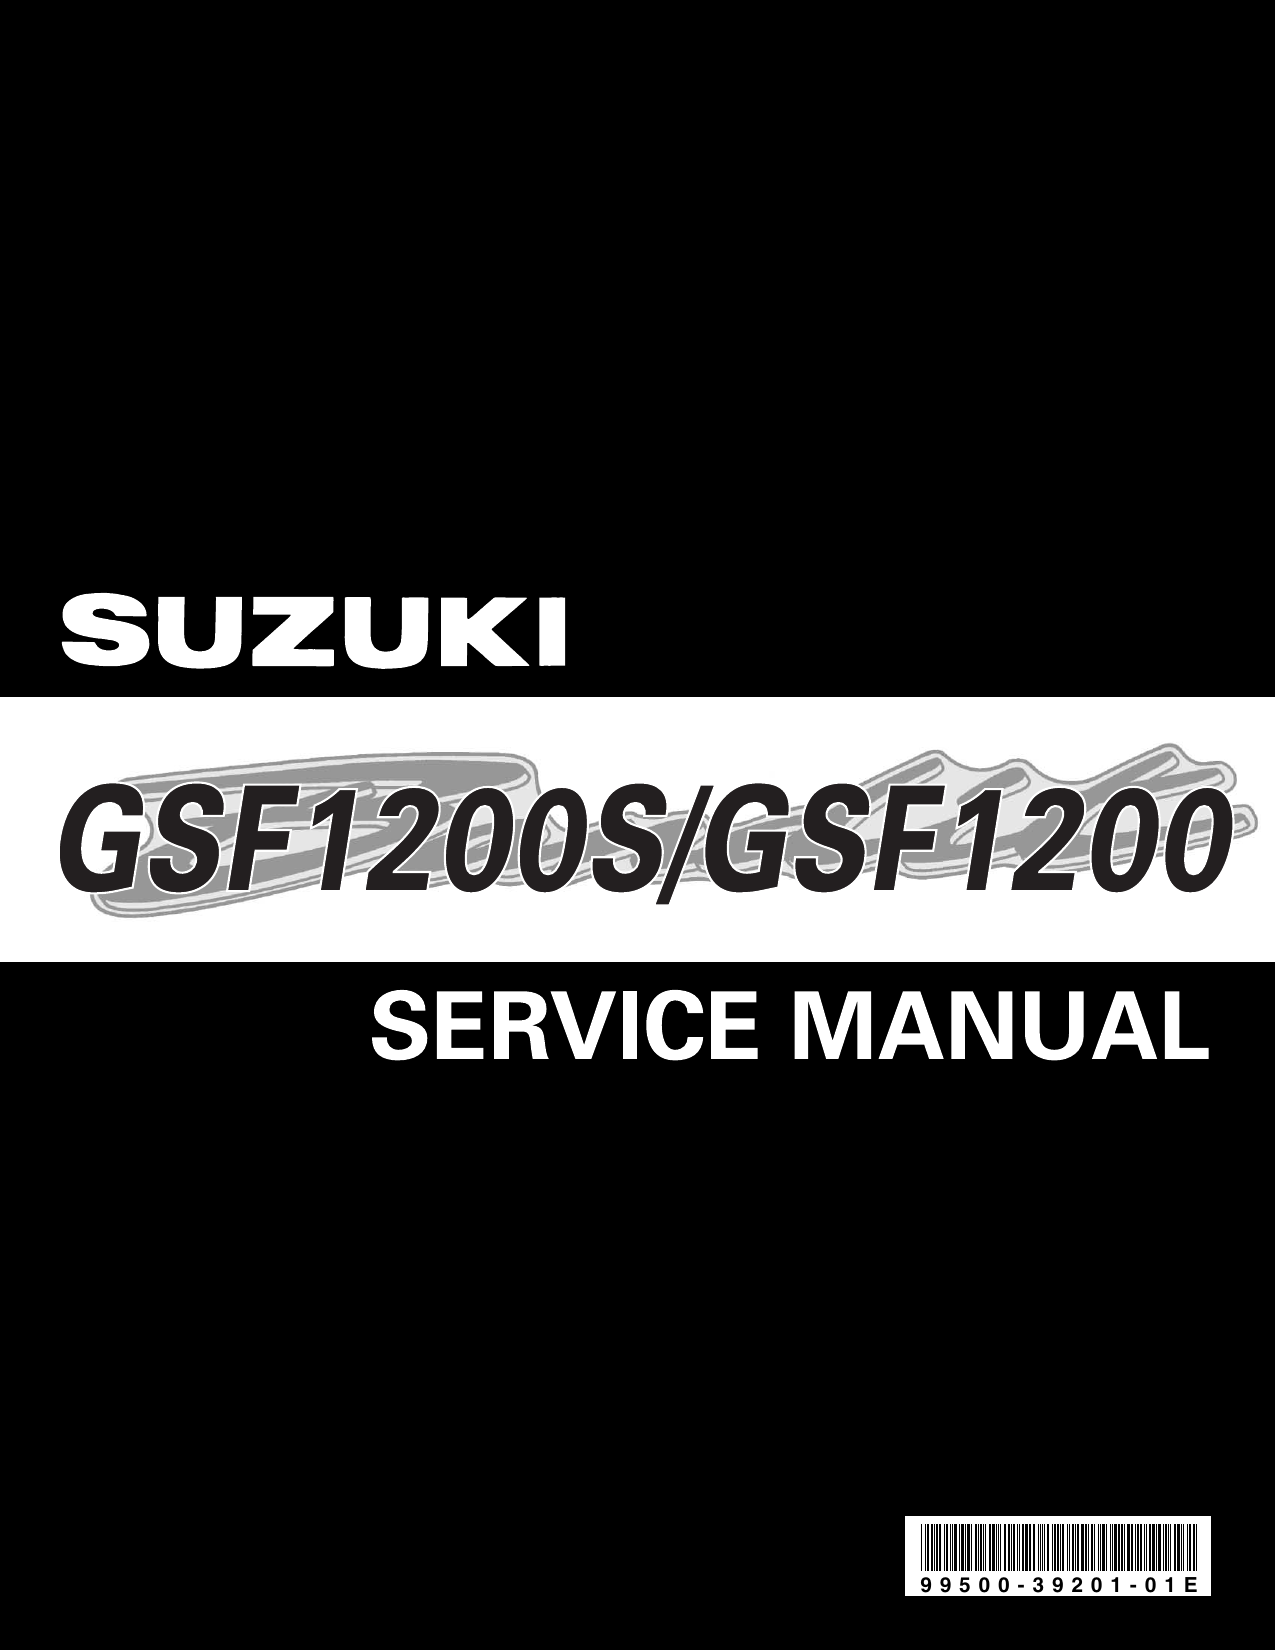 2001-2002 Suzuki GSF1200, GSF1200S service manual Preview image 6